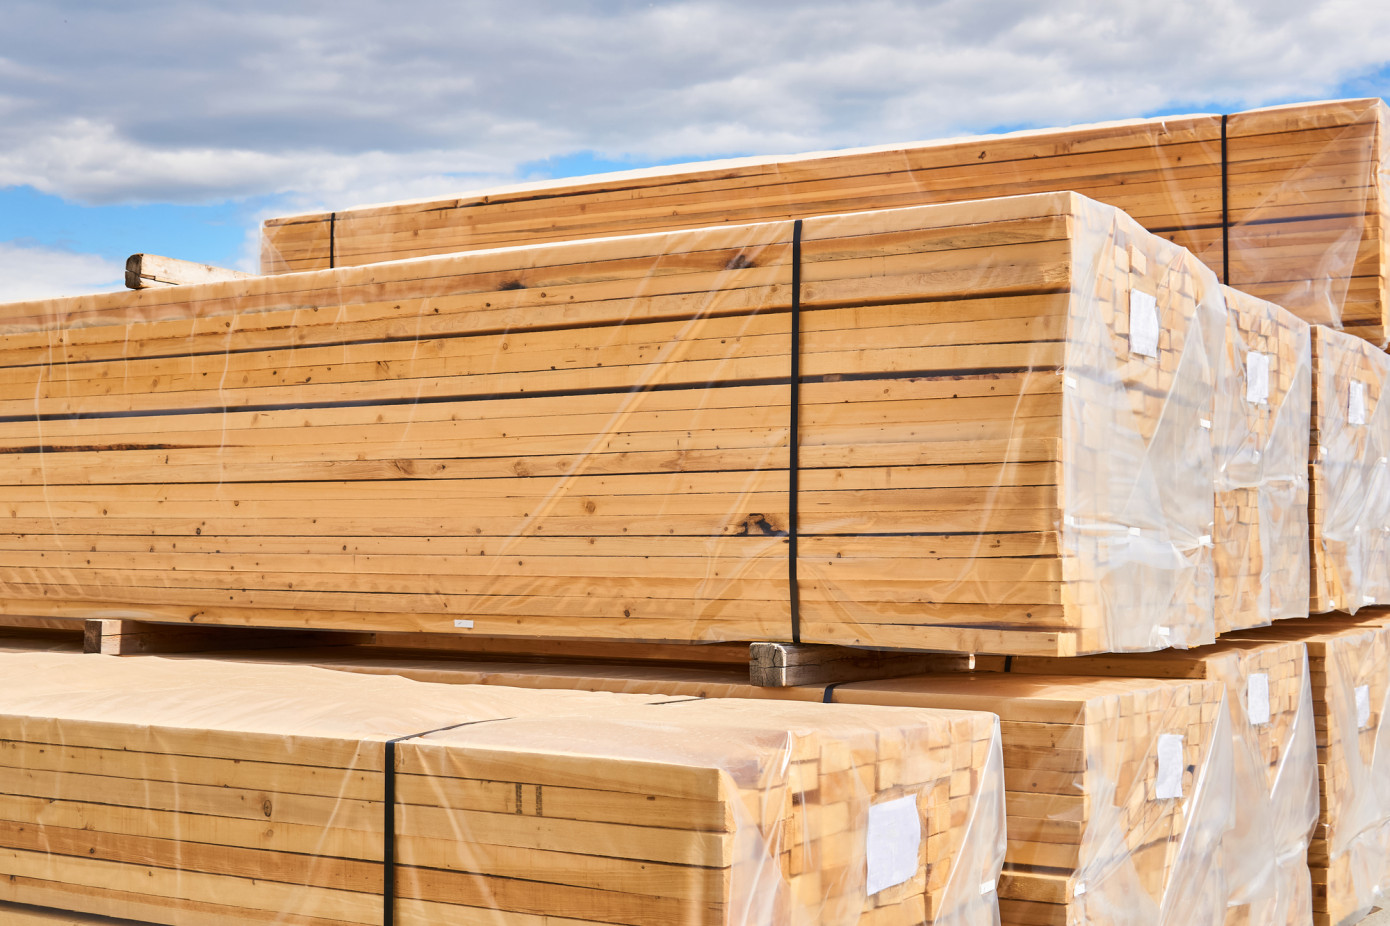 Conifex to take unscheduled downtime at Mackenzie lumber mill in British Columbia